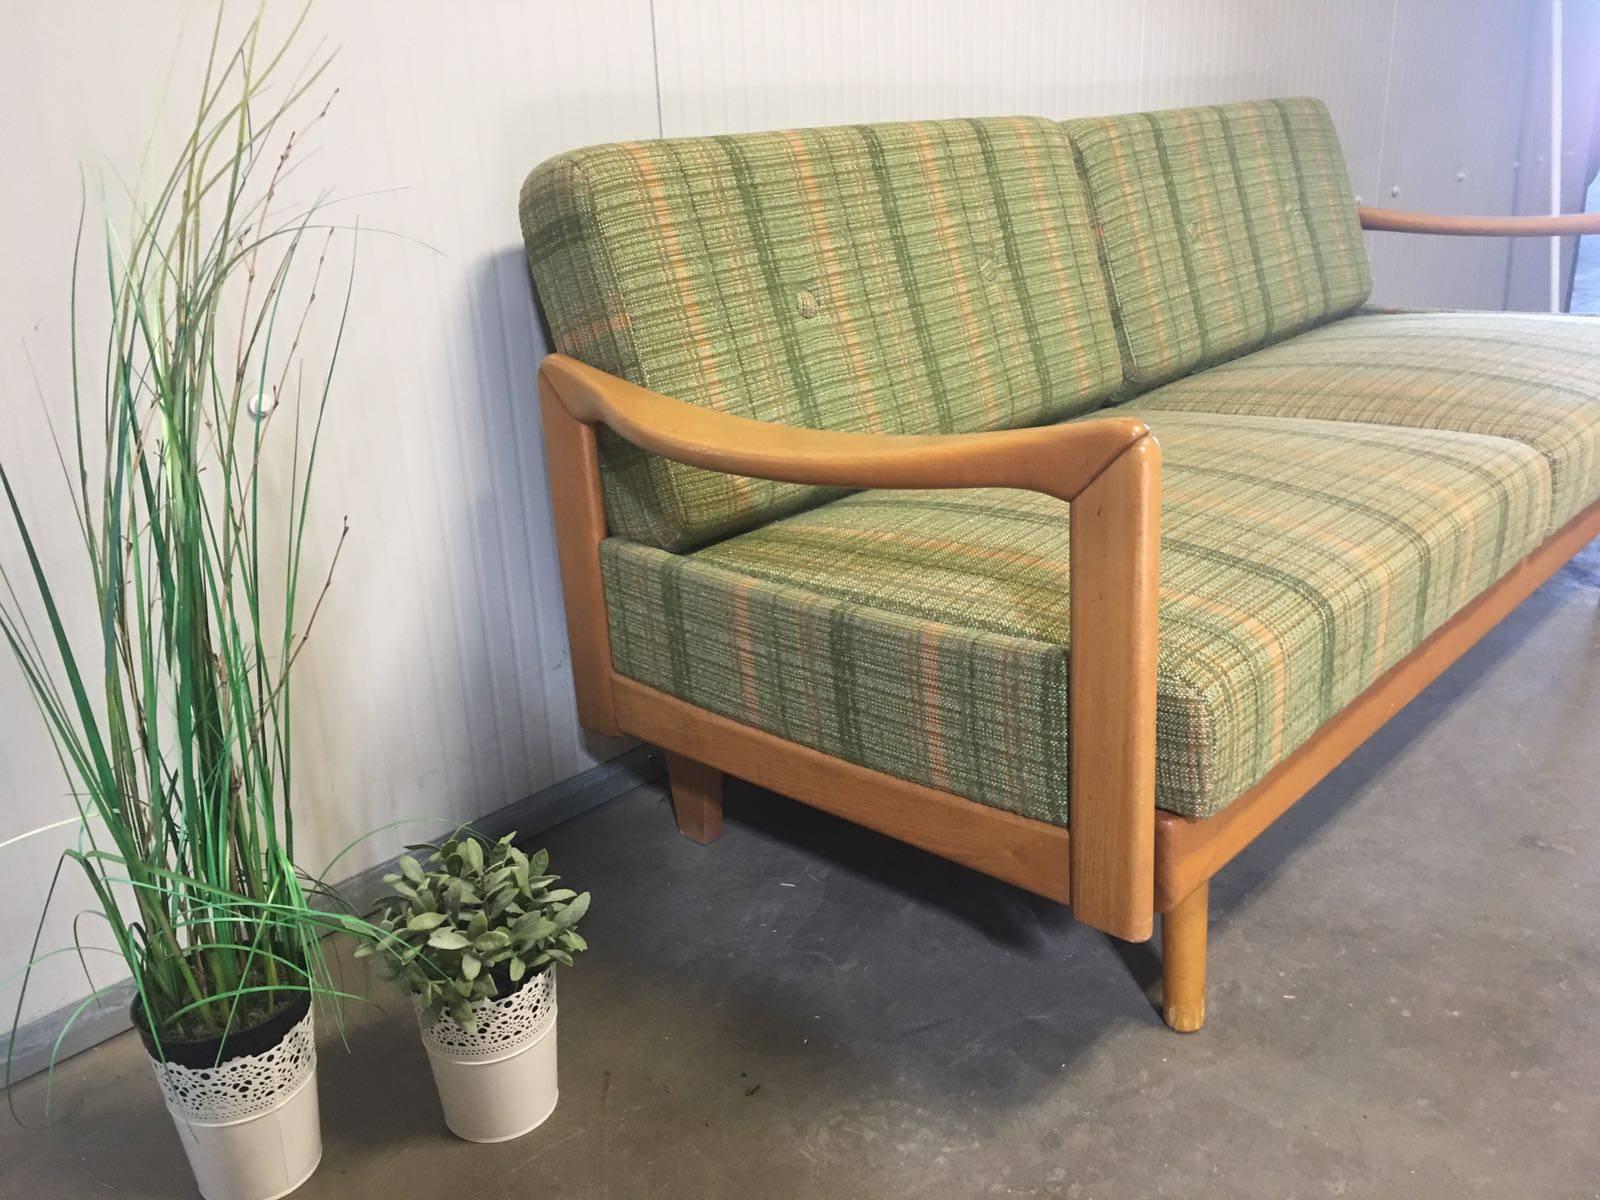 Midcentury day d/sofa designed by Walter Knoll. Designed and produced in the 1950s. When you extend the sofa and move the pillows, this sofa becomes a daybed. 

In original condition. Pillows are in excellent condition and very firm. Wood also in